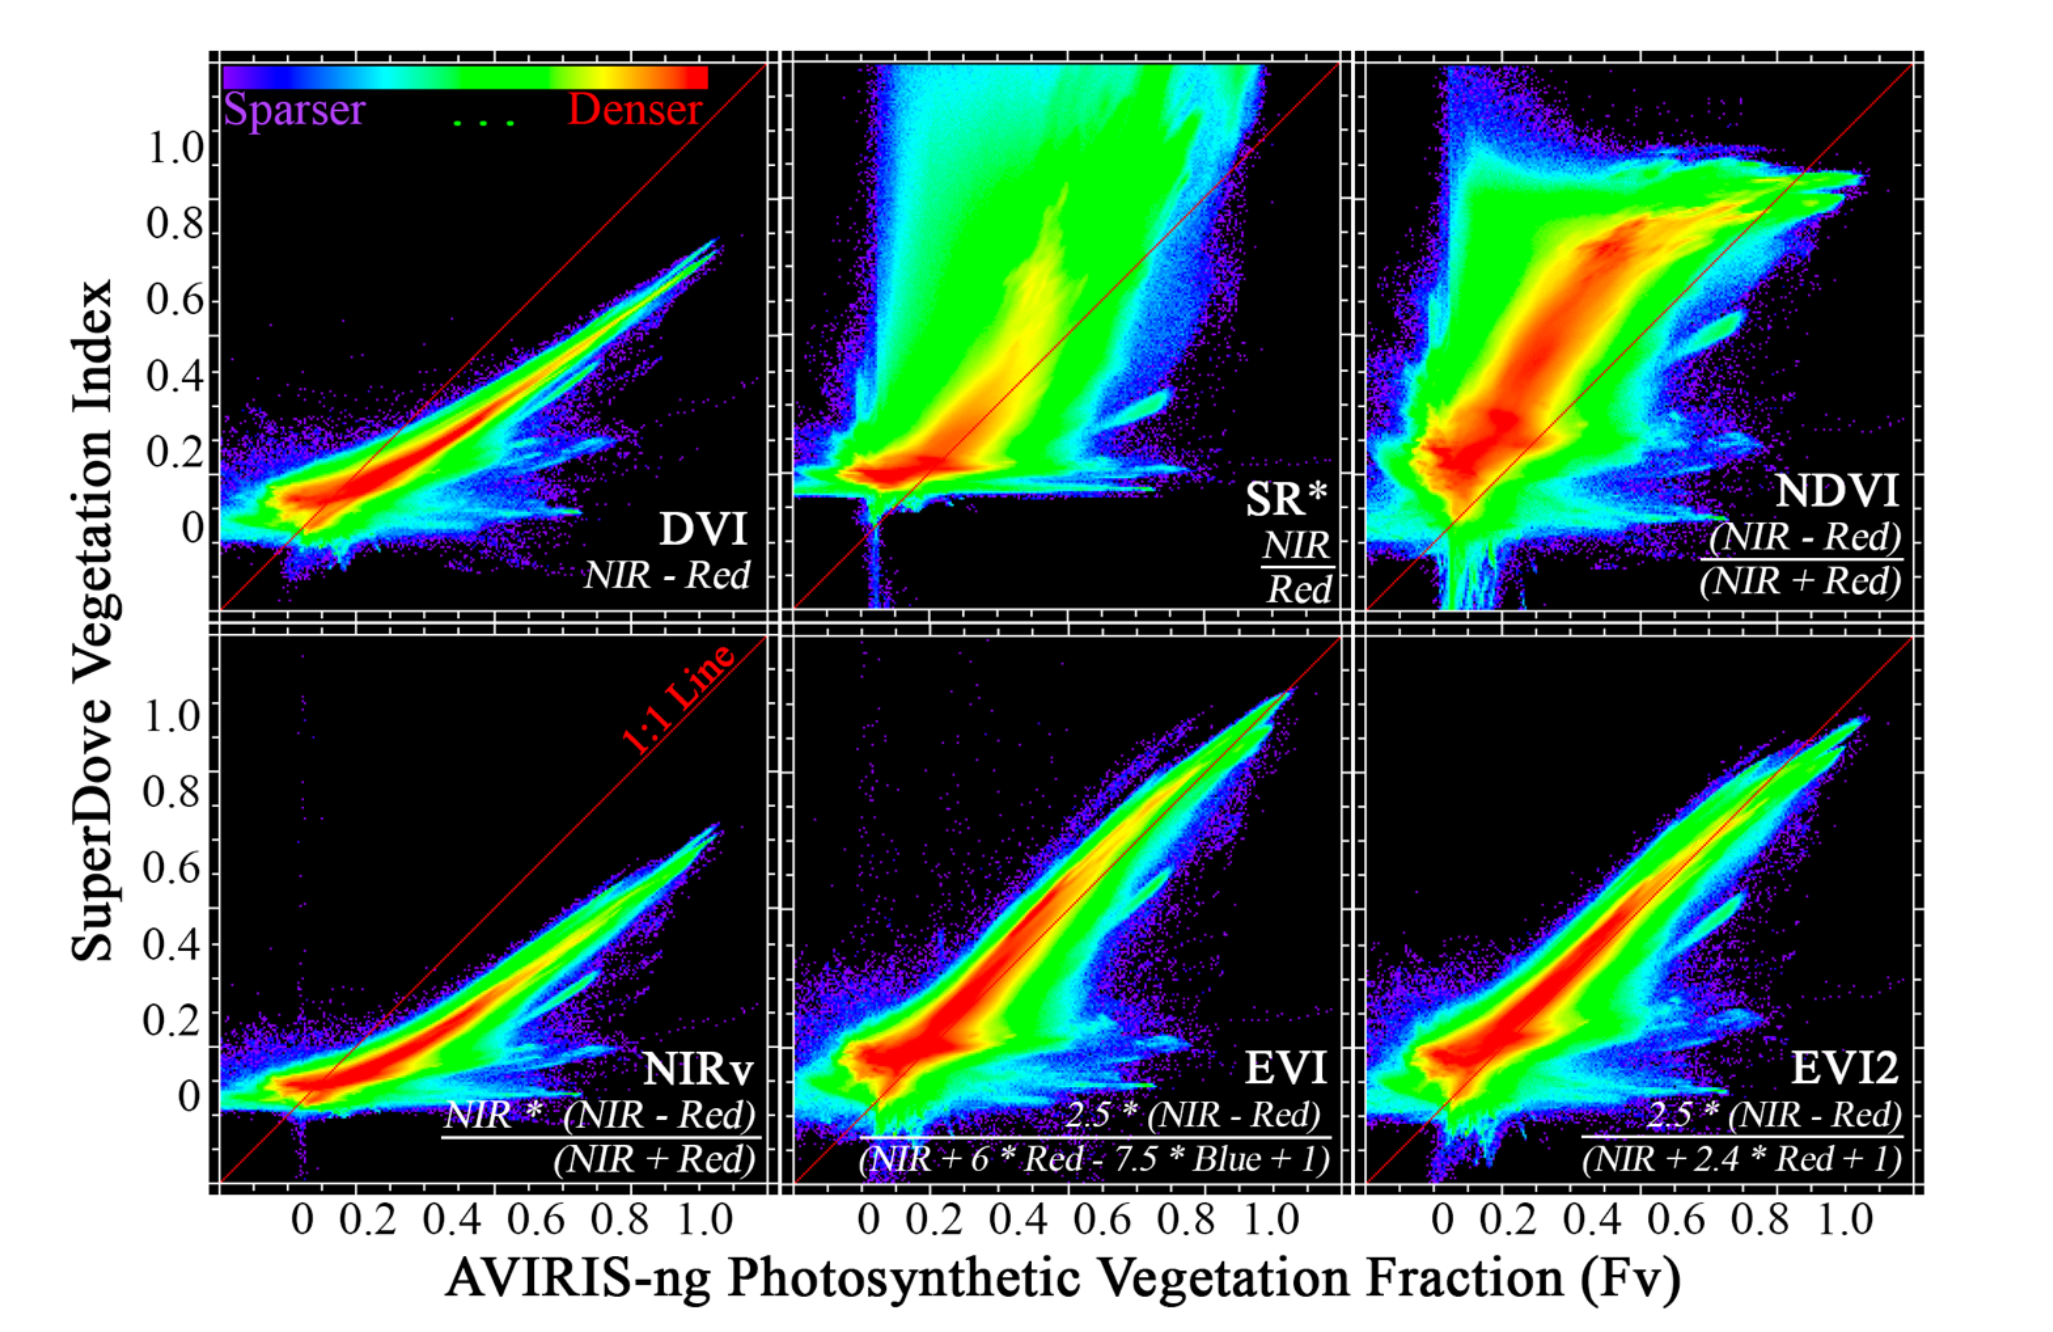 Linking Common Multispectral Vegetation Indices to Hyperspectral Mixture Models